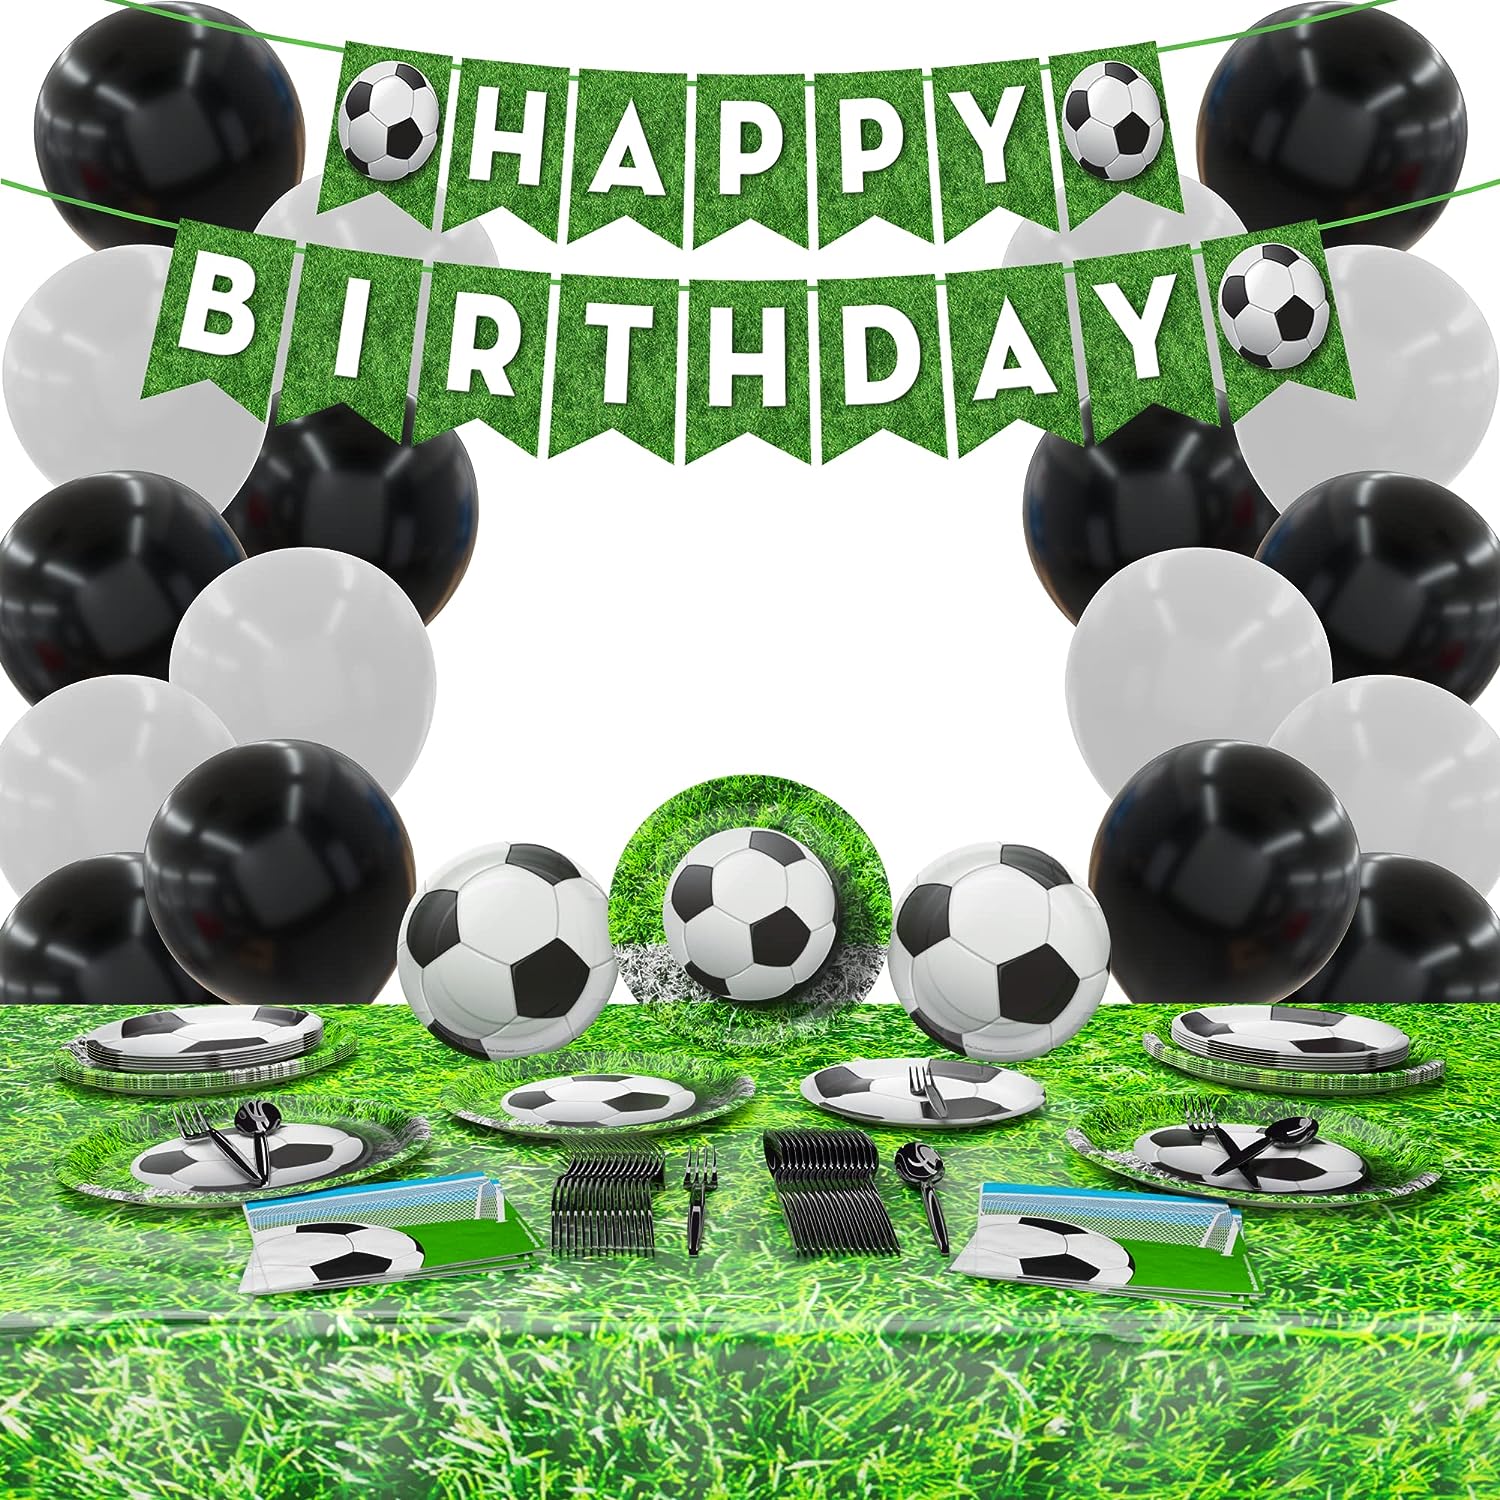 These fun Soccer Deluxe Party Supplies Packs 16 Soccer Dinner Plates, 16 Soccer Dessert Plates, 20 Soccer Lunch Napkins, 2 Grass Table Covers, 1 Soccer Banner, 10 White Balloons, 10 Black Balloons, Plastic Forks, and Plastic Spoons.